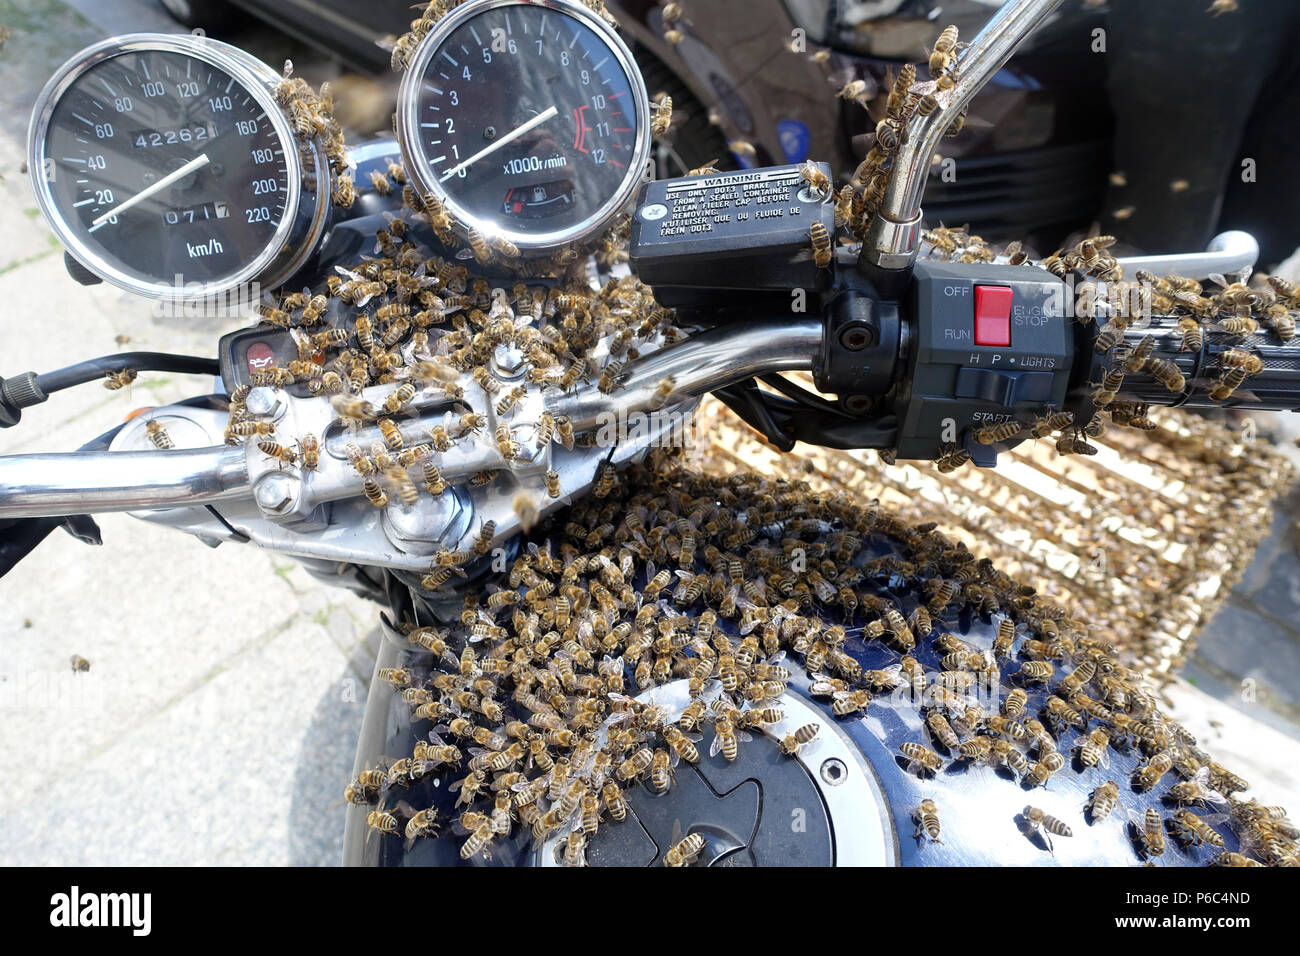 Berlin, Germany - swarm of bees on the handlebar of a motorbike Stock Photo